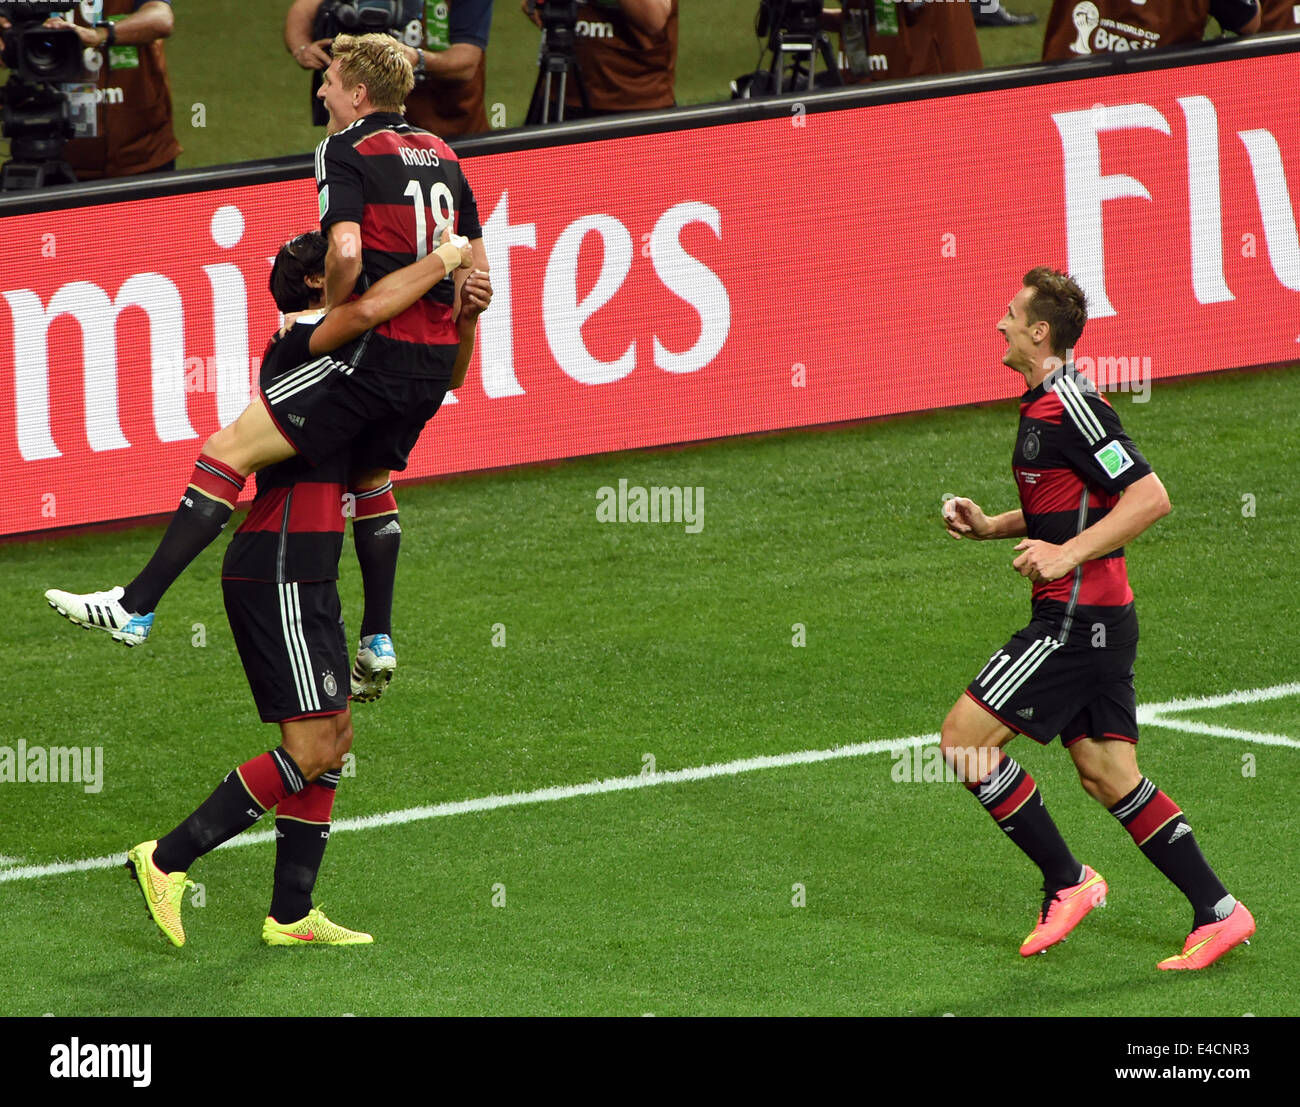 Belo Horizonte, Brazil. 08th July, 2014. Germany's Toni Kroos (C) celebrates with team mates Sami Khedira and Miroslav Klose (R) after scoring a goal during the FIFA World Cup 2014 semi-final soccer match between Brazil and Germany at Estadio Mineirao in Belo Horizonte, Brazil, 08 July 2014. Photo: Andreas Gebert/dpa/Alamy Live News Stock Photo